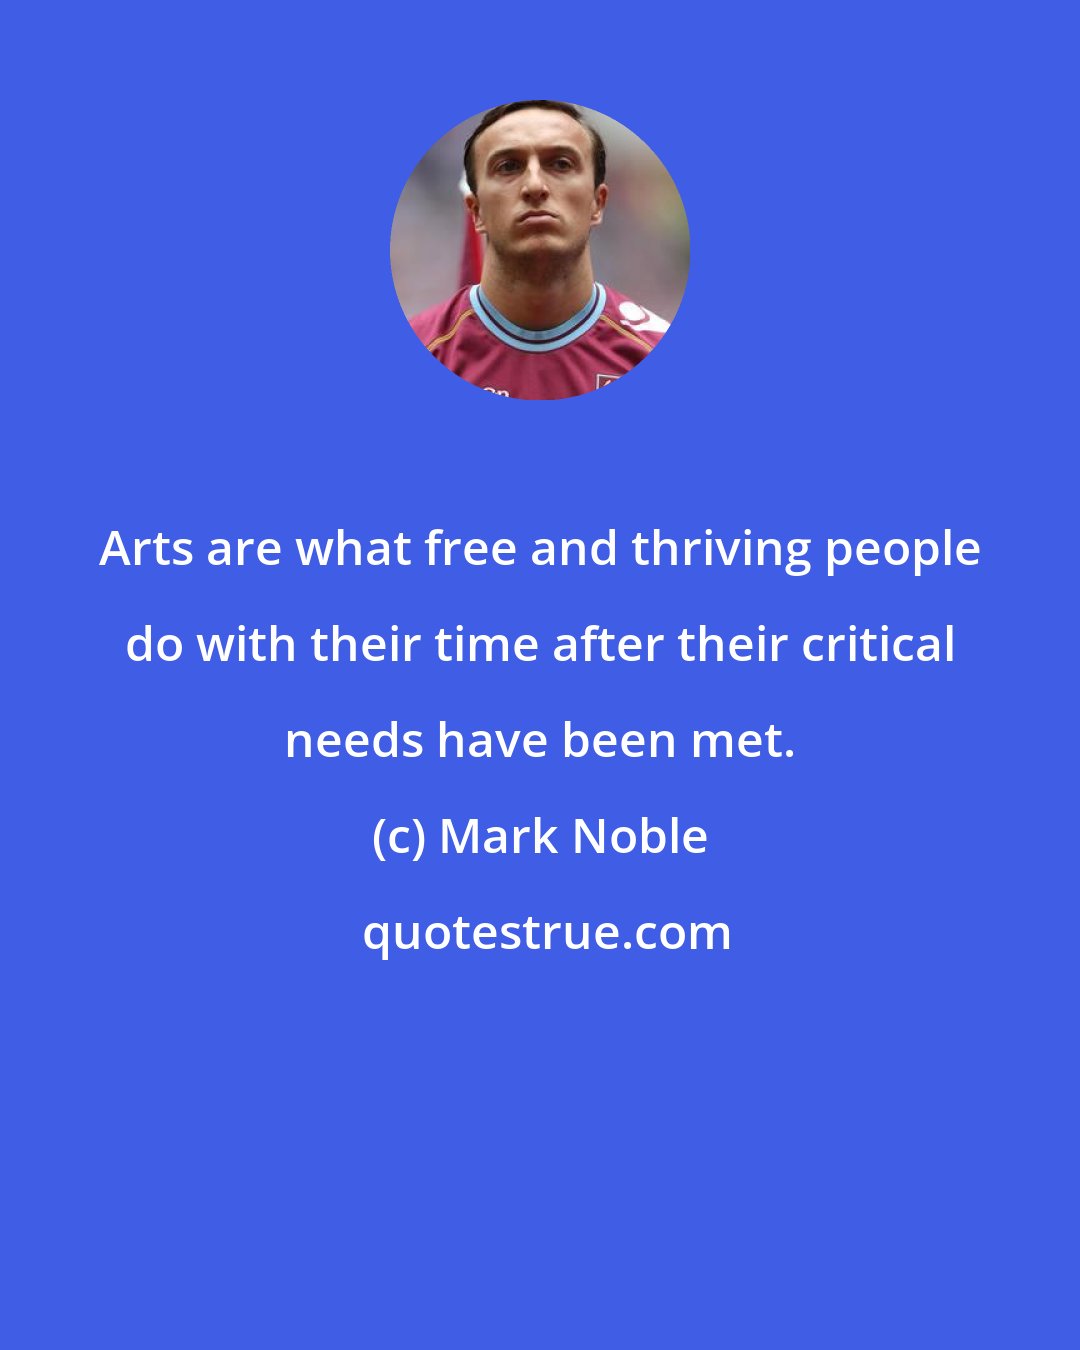 Mark Noble: Arts are what free and thriving people do with their time after their critical needs have been met.